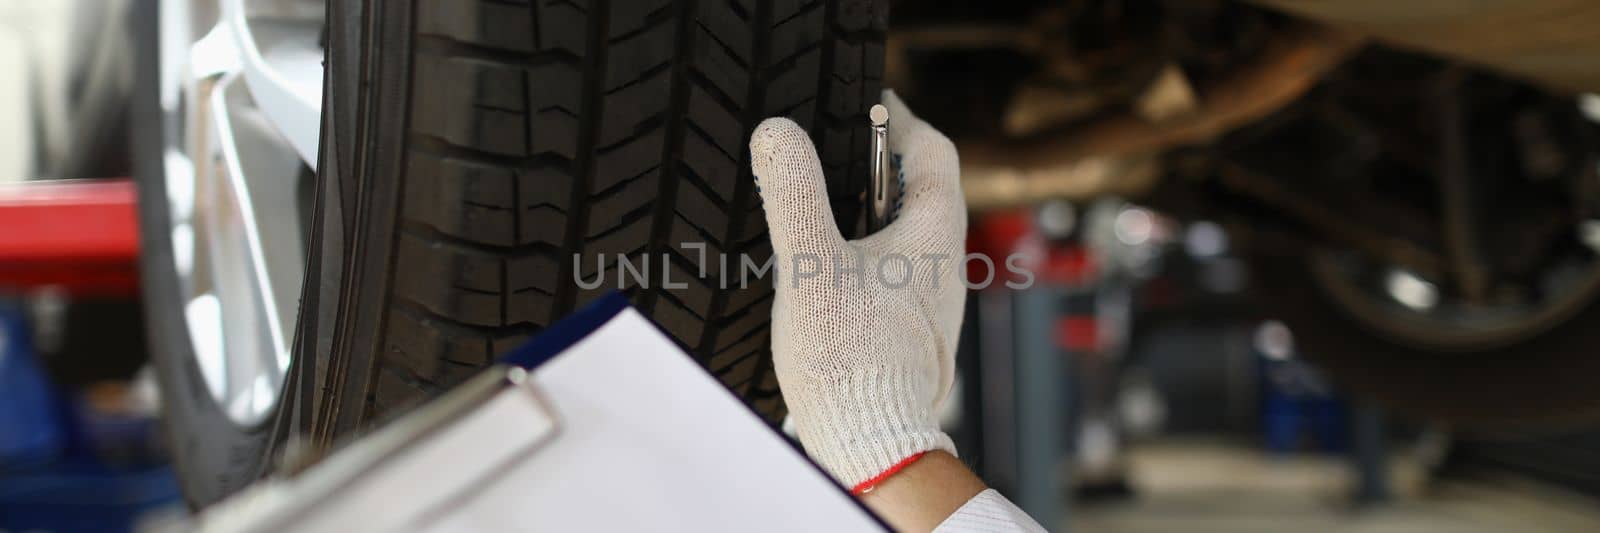 Man mechanic working under car at car service station by kuprevich